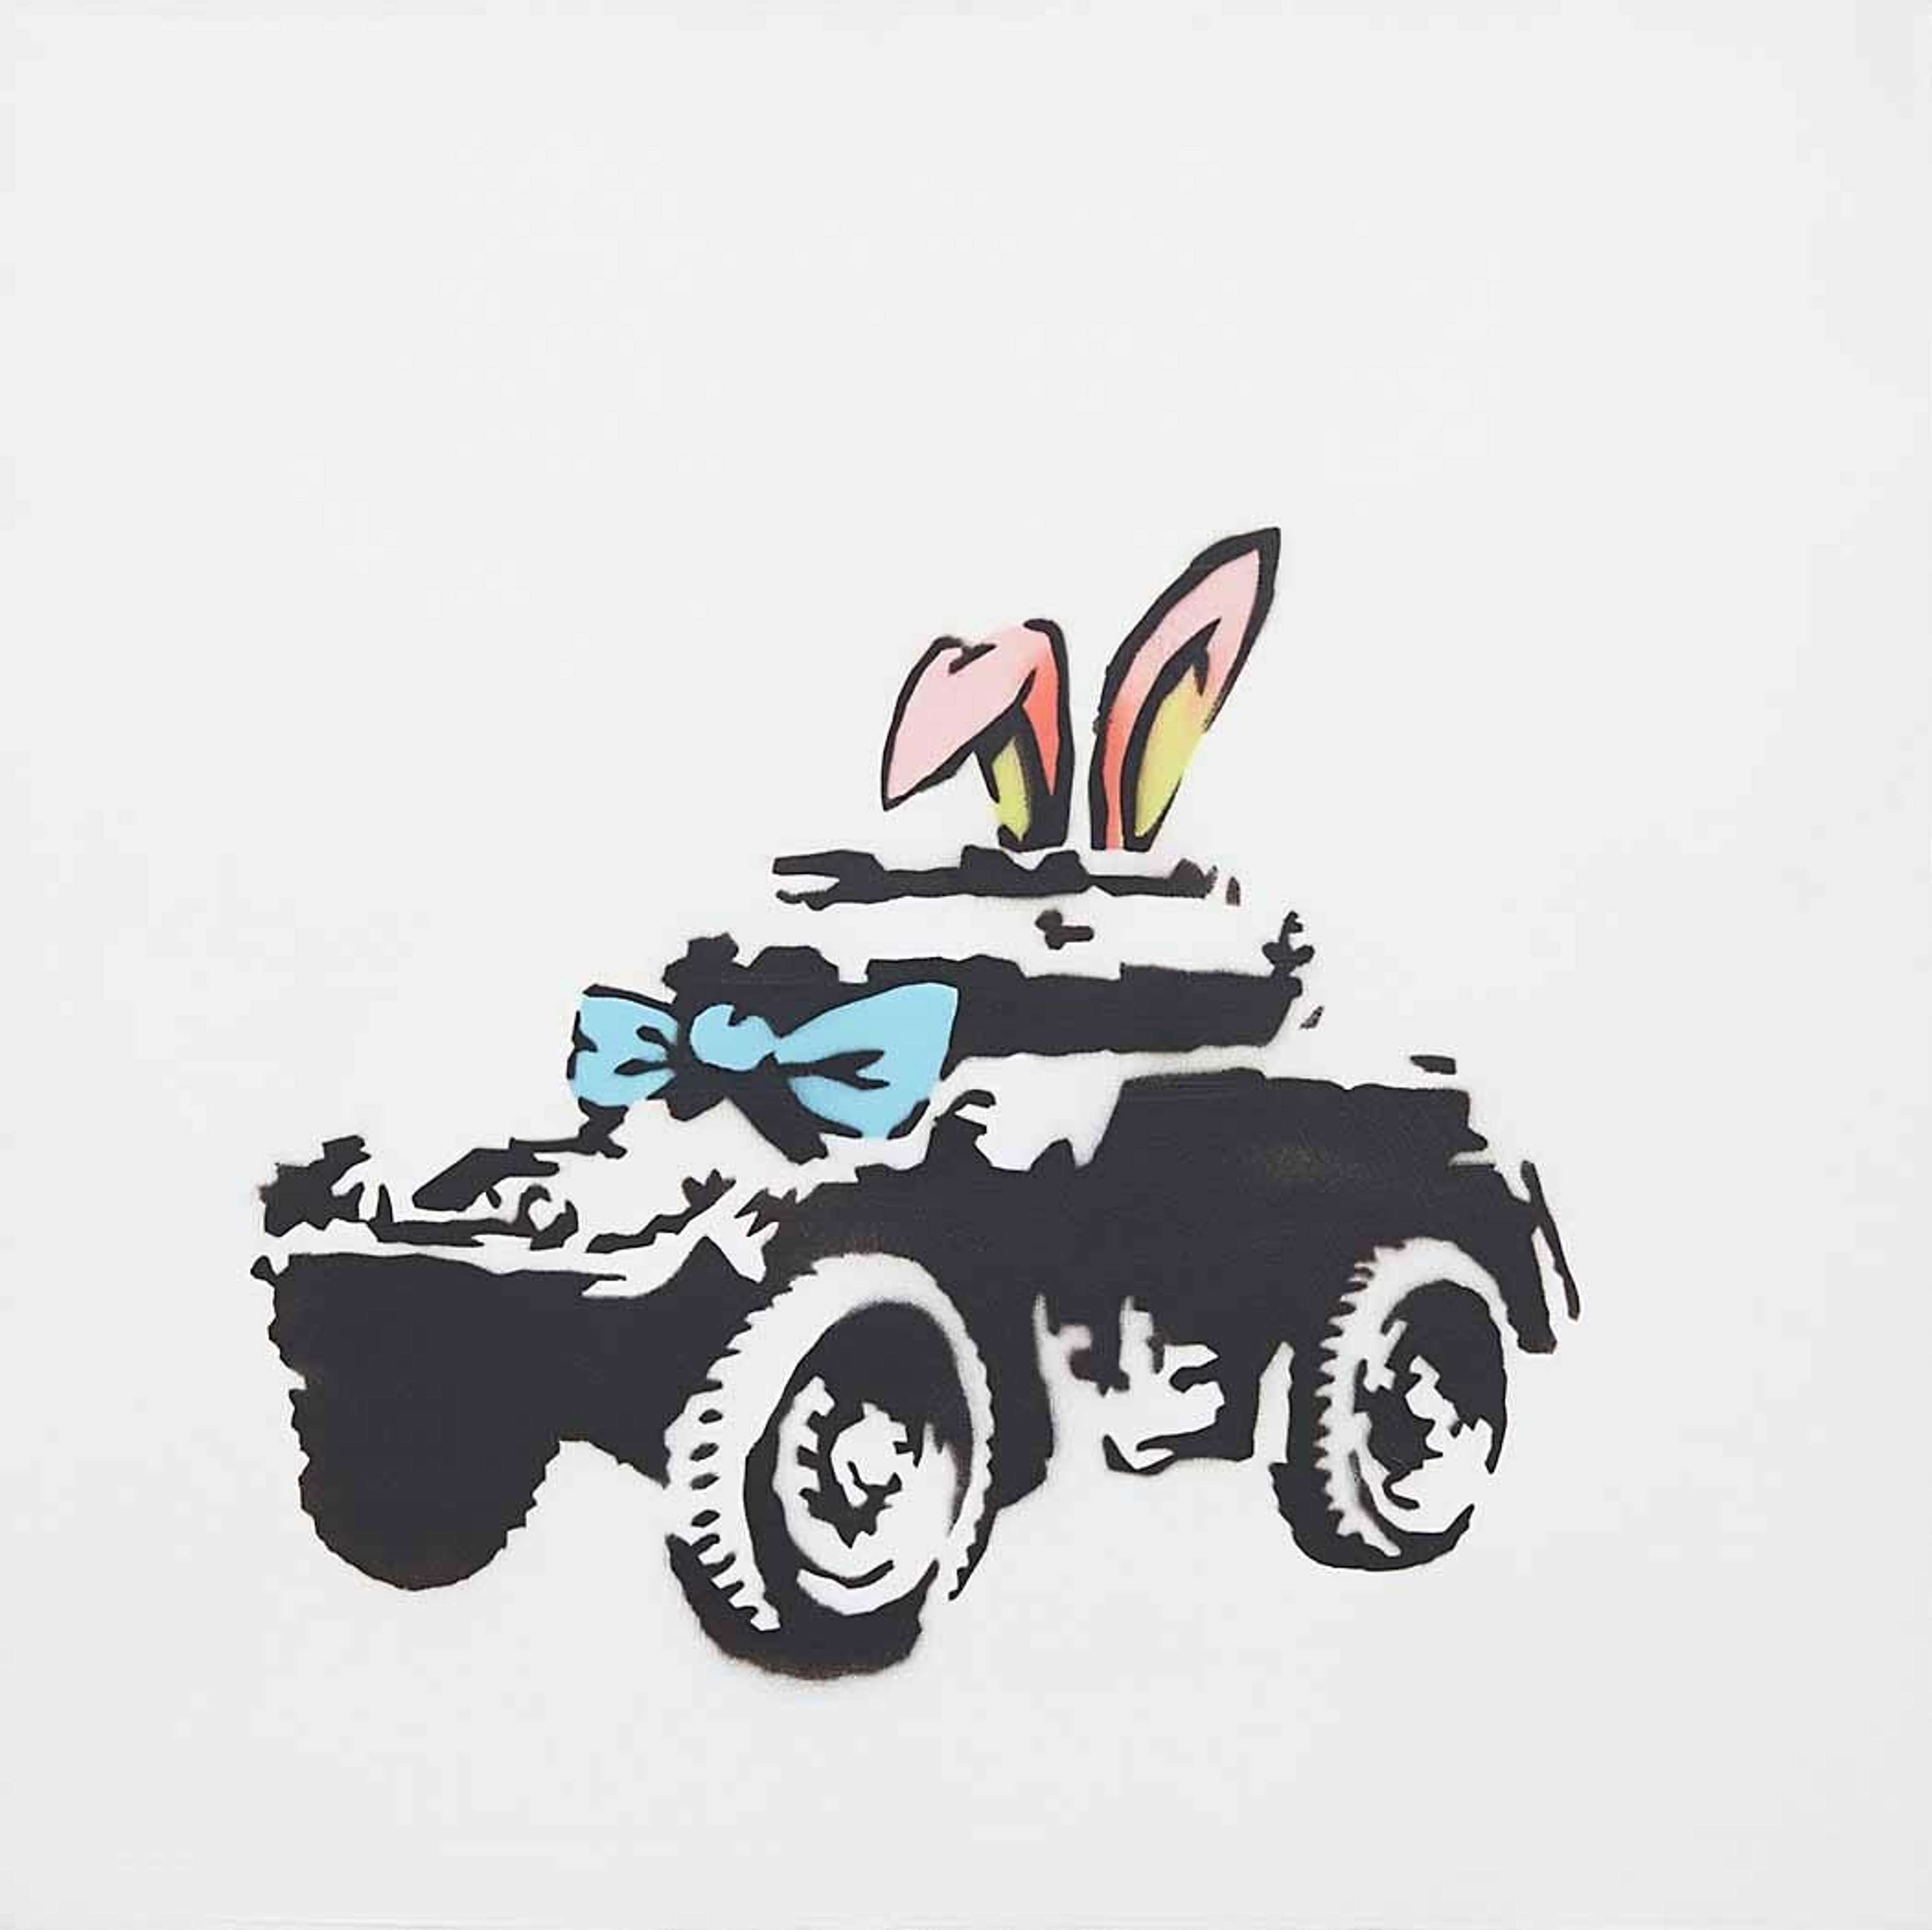 Banksy’s Armoured Car. A spray paint and acrylic work of an army tank with animated bunny ears and a bow on it. 